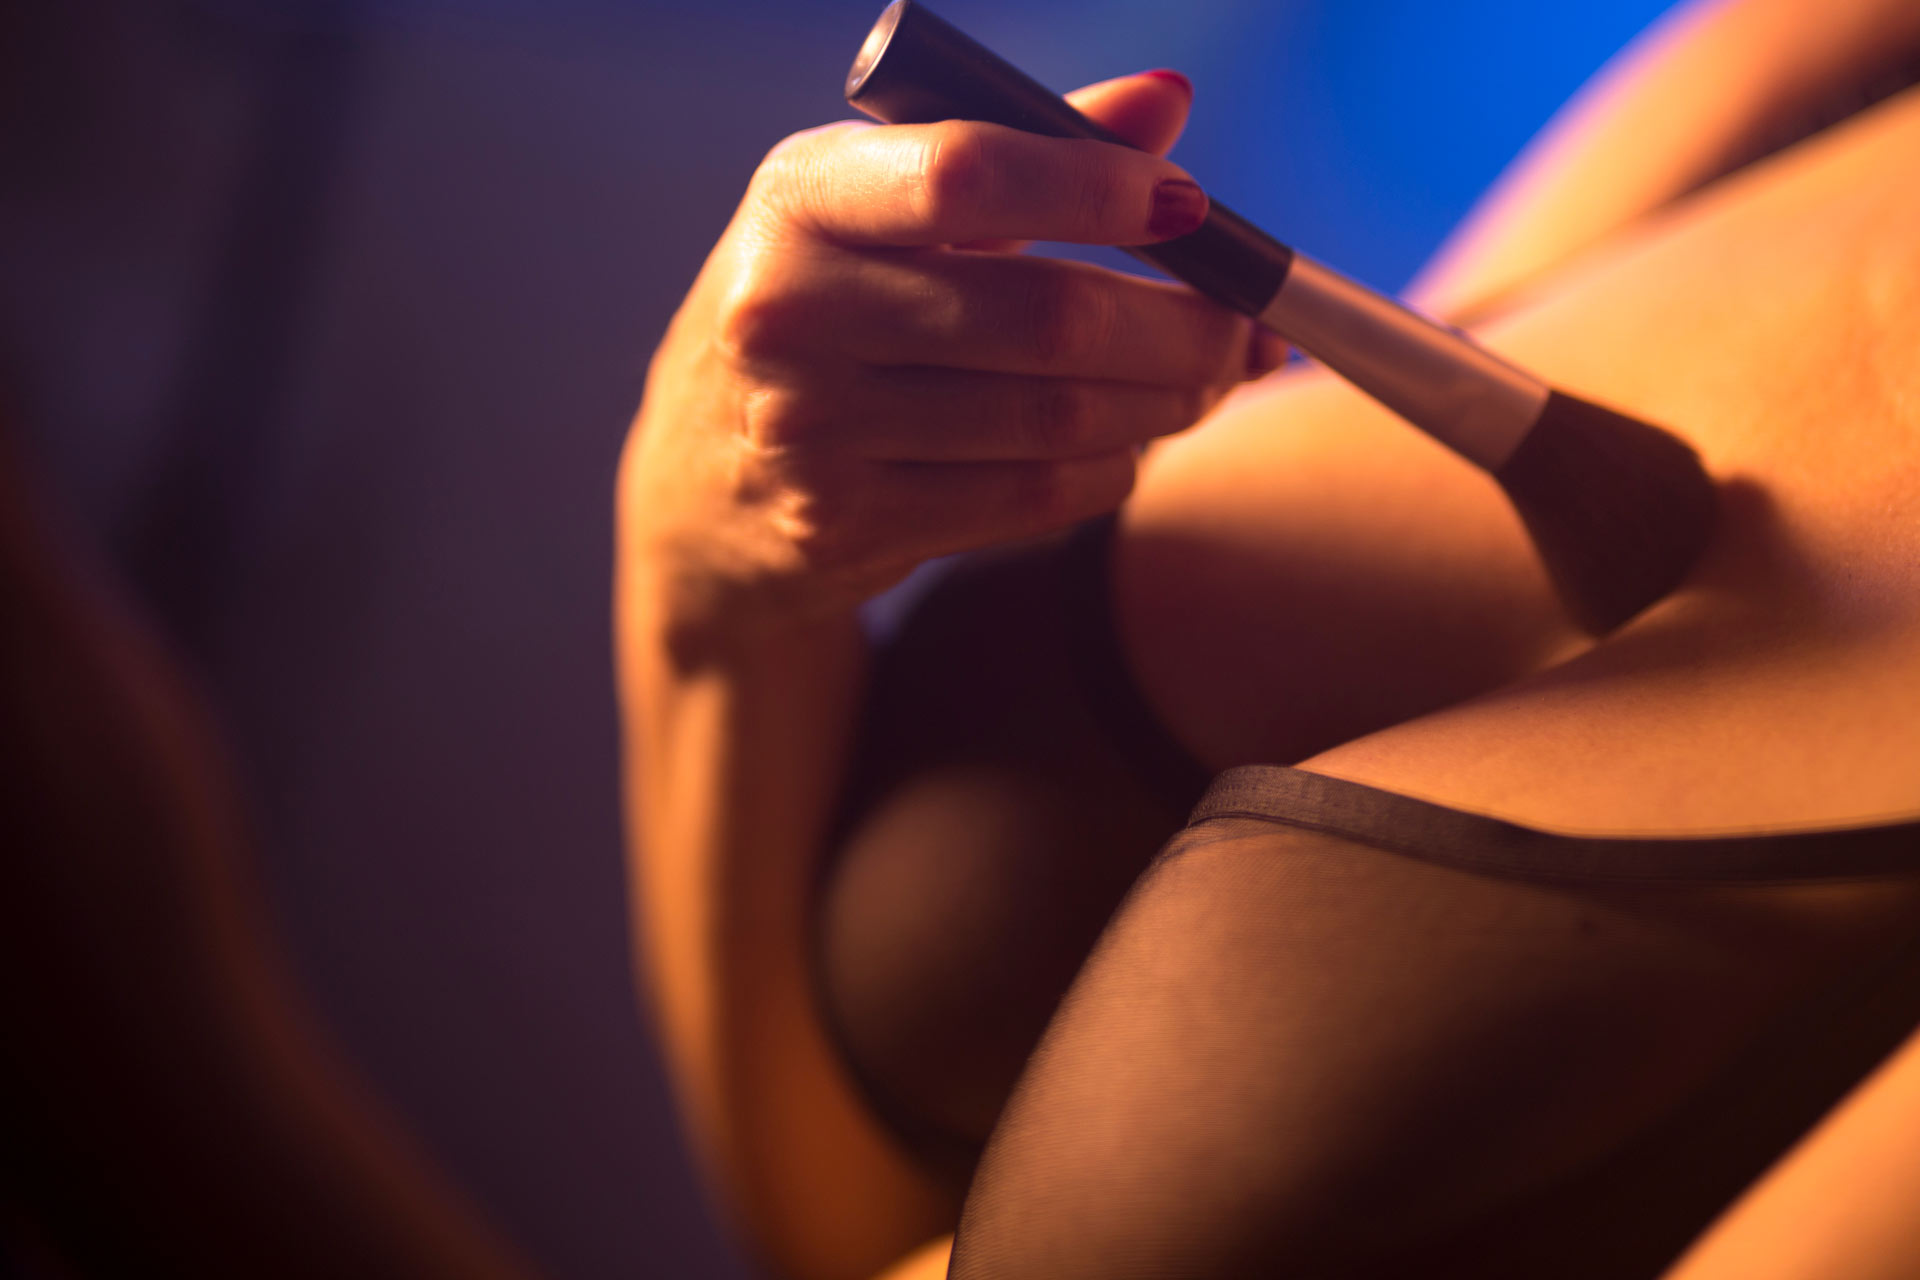 Cleavage of BBW woman in black bra holding a makeup brush and applying it on her chest, with blue light behind her.